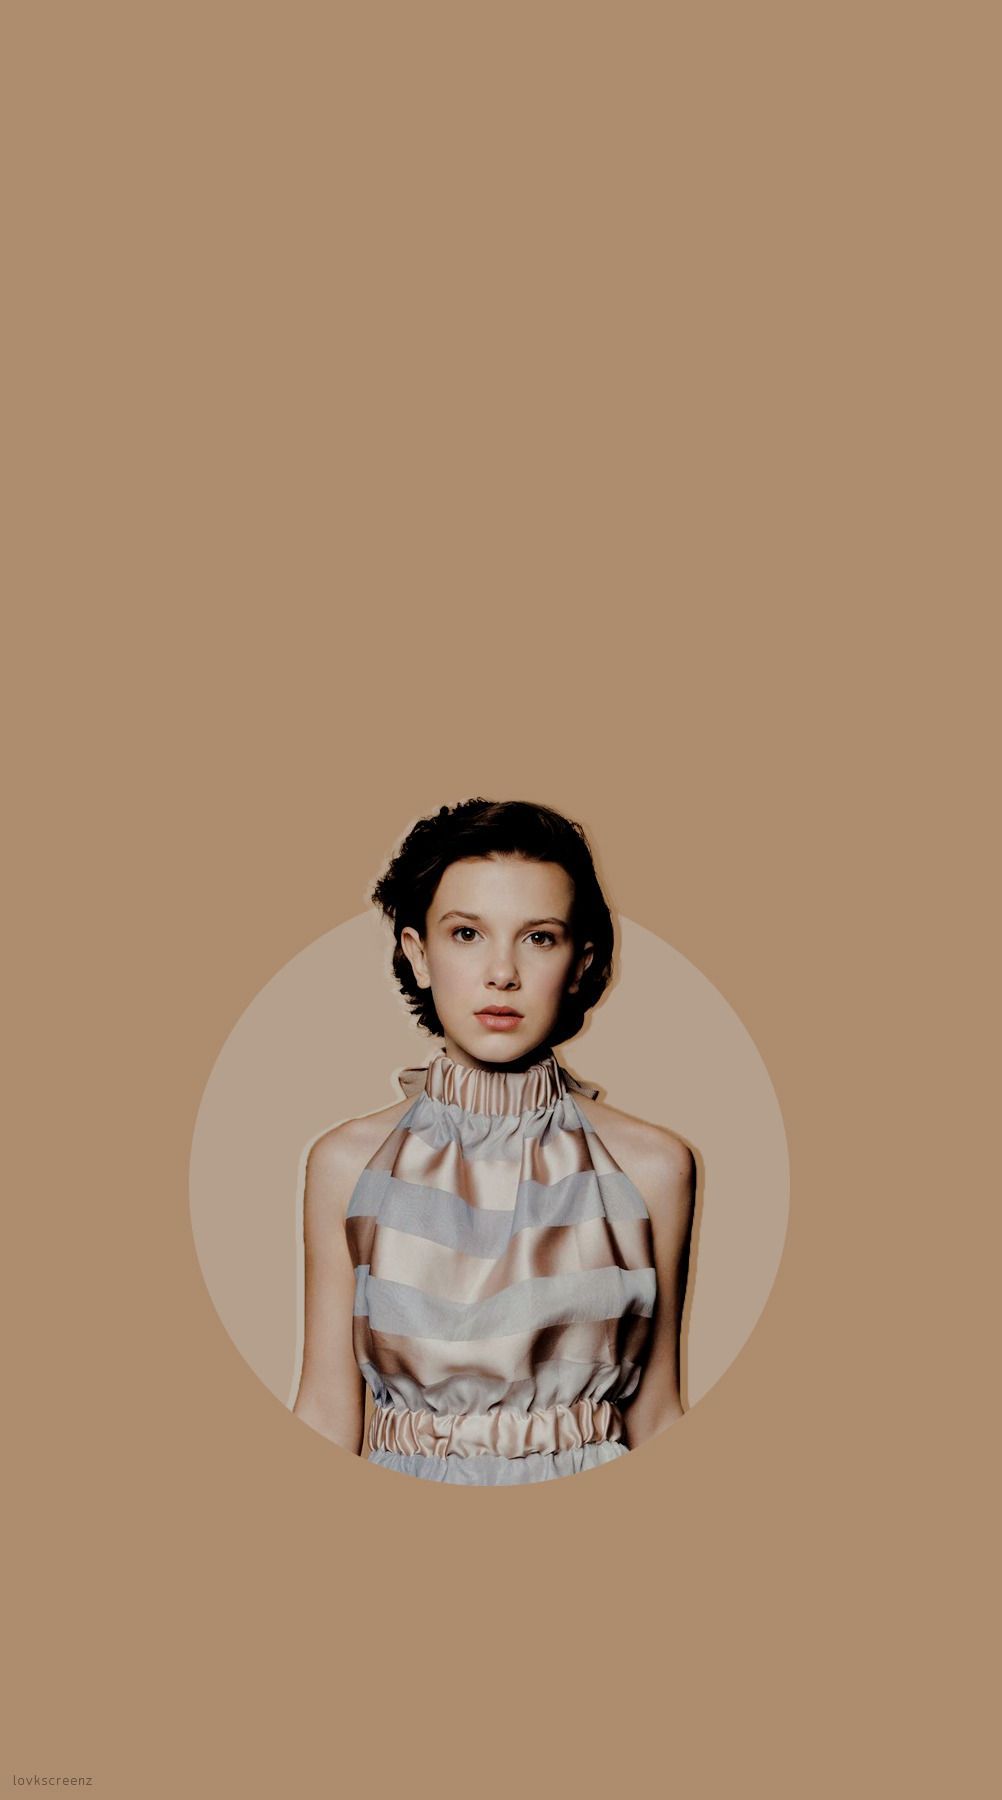 Millie Bobby Brown iPhone Wallpaper Free Millie Bobby Brown iPhone Background